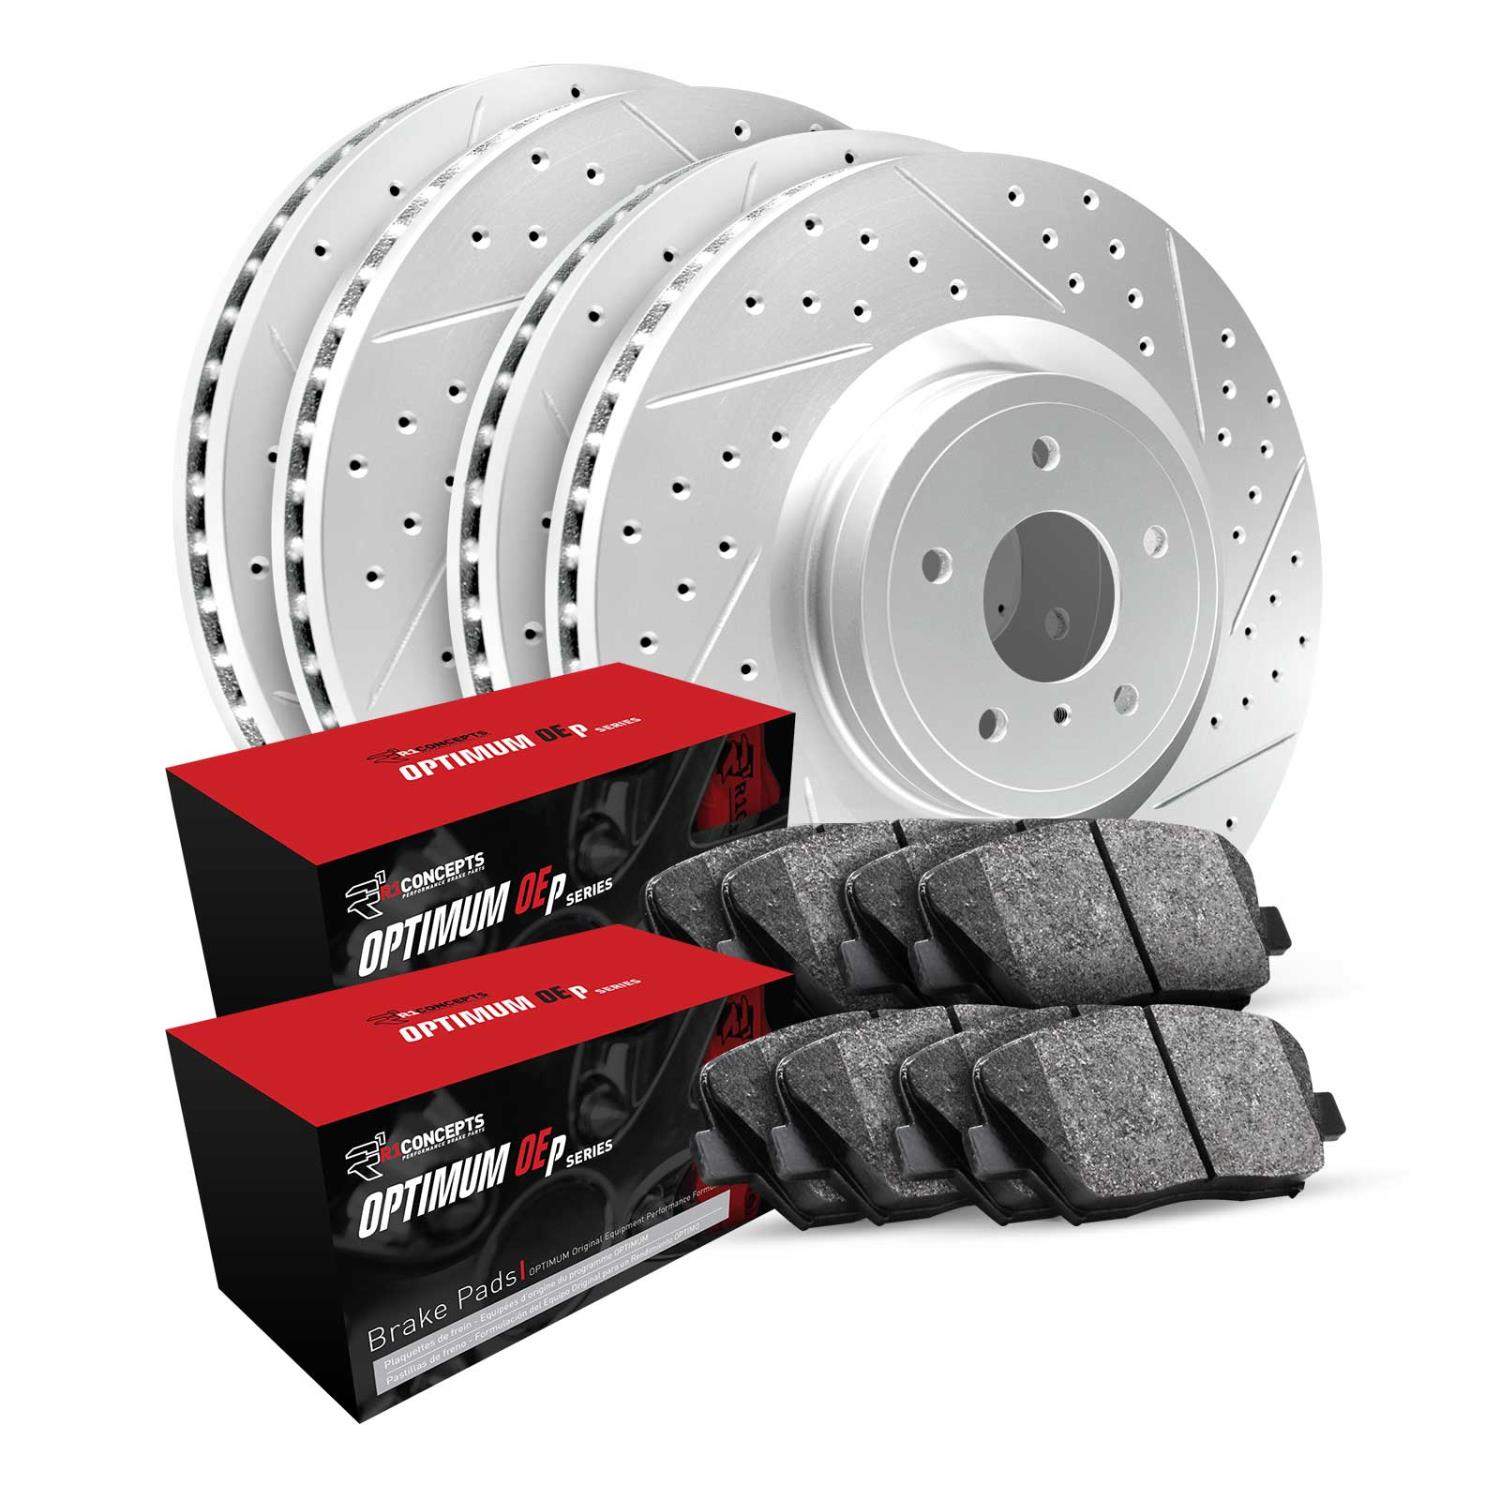 GEO-Carbon Drilled & Slotted Brake Rotor & Drum Set w/Optimum OE Pads & Shoes, 2003-2008 Fits Multiple Makes/Models